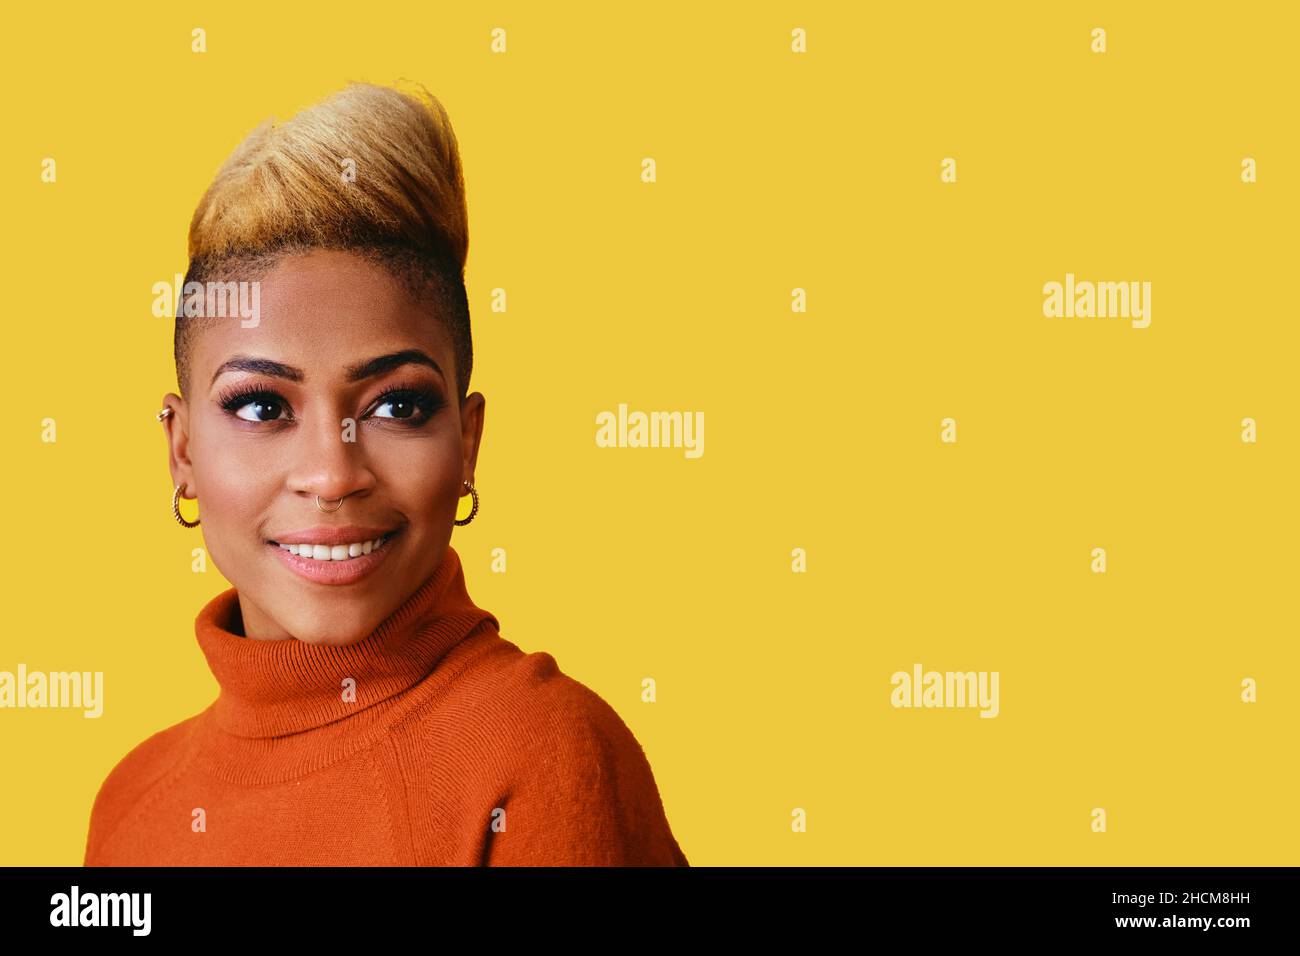 Portrait of a smiling young woman with cool hair and sweater looking at Yellow copy space Stock Photo